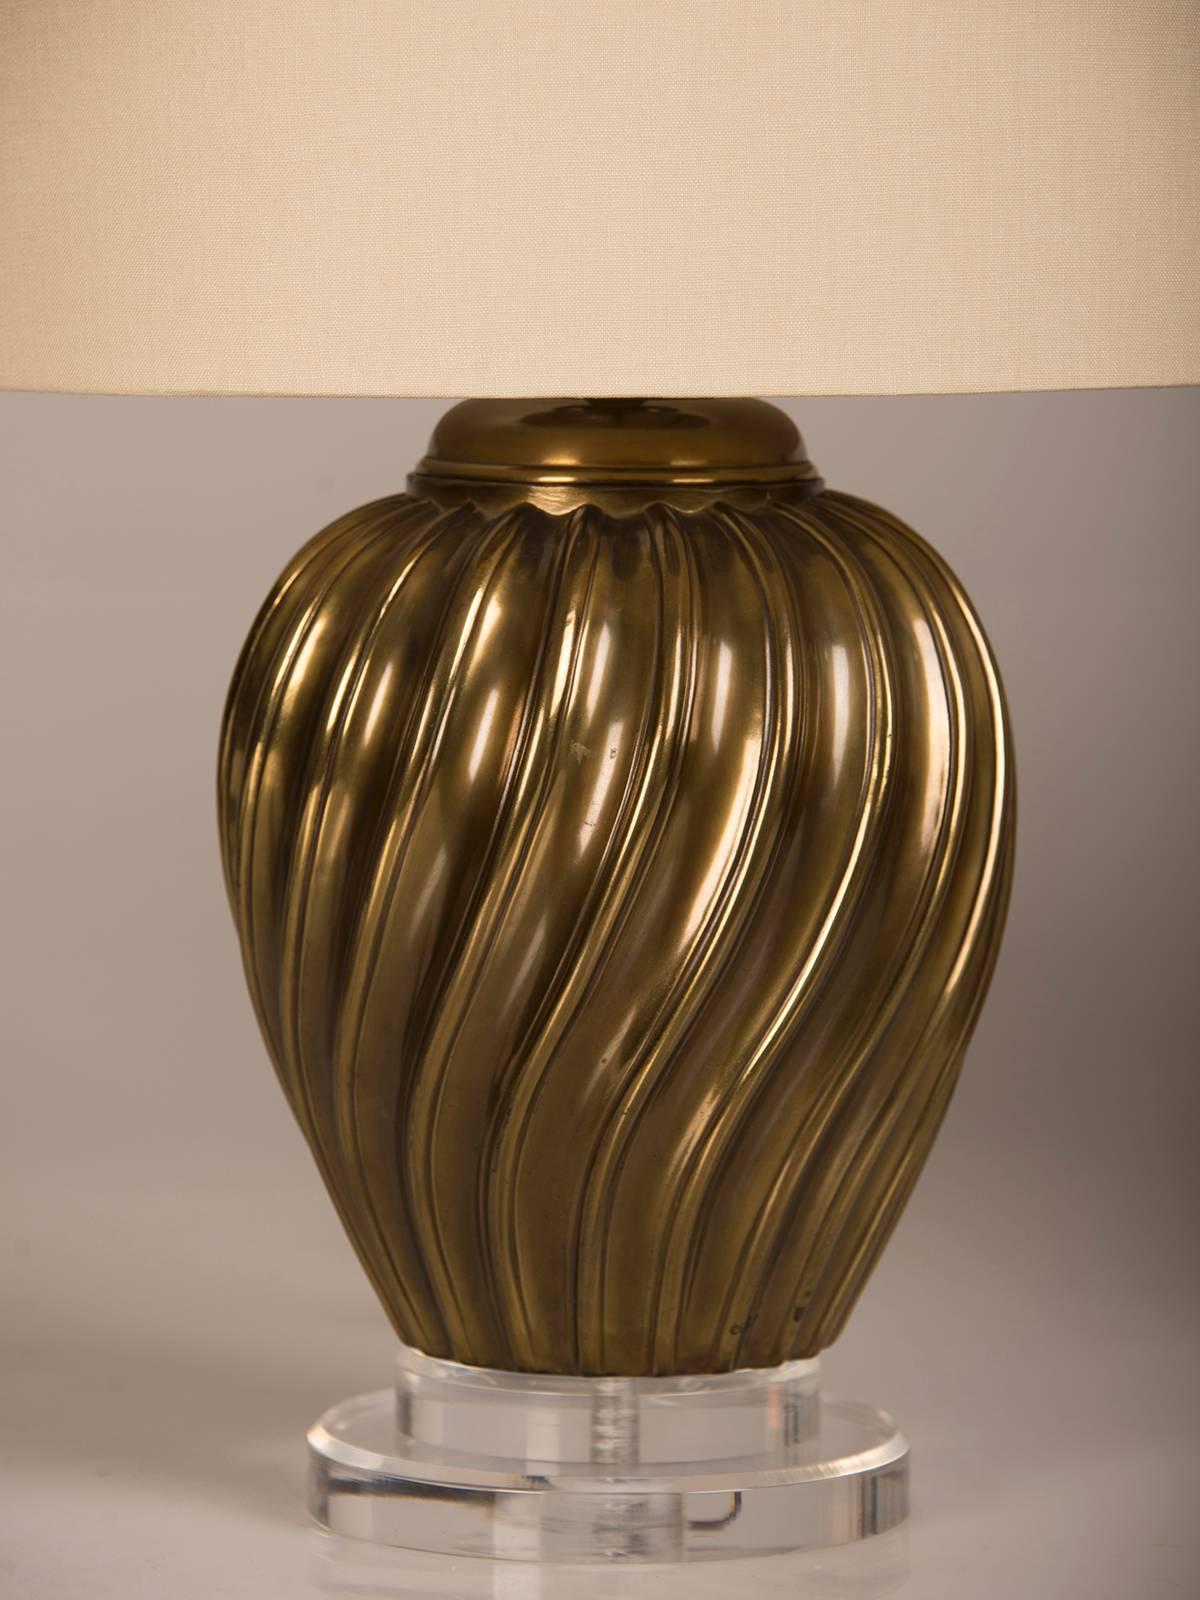 Pair of Italian Vintage Brass Swirl Vases Mounted as Custom Lamps, circa 1950 For Sale 4